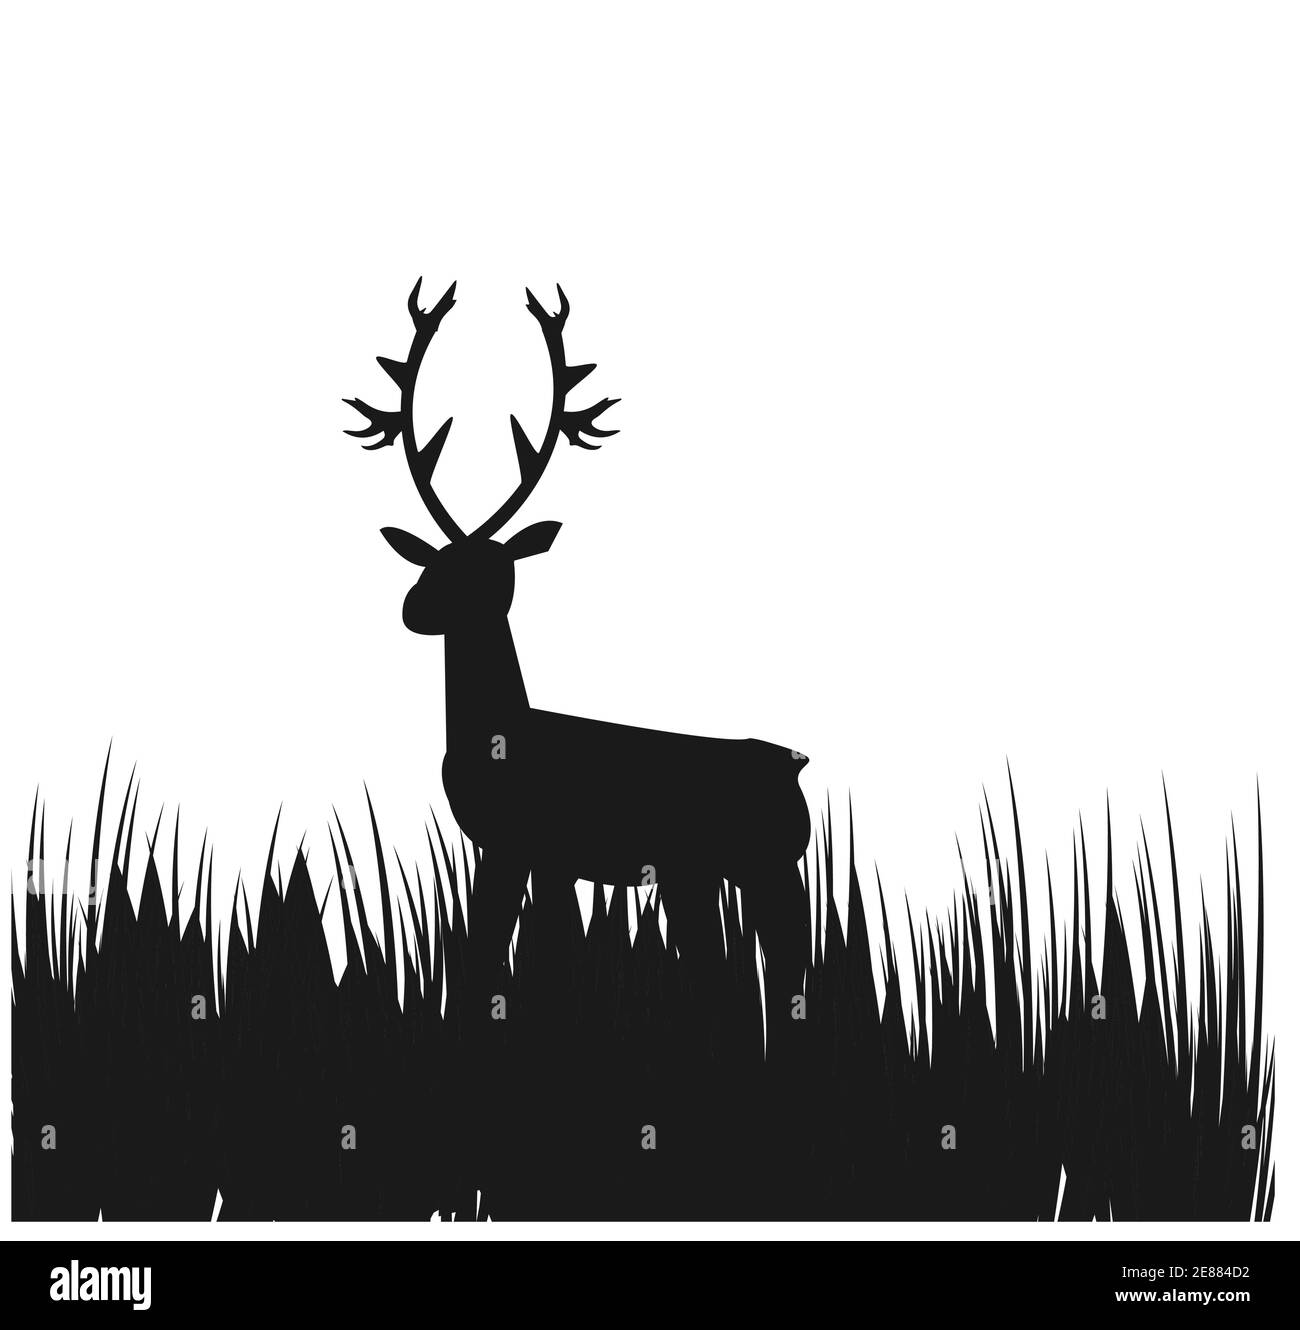 simple picture deer in the grass field vector logo and illustration Stock Vector